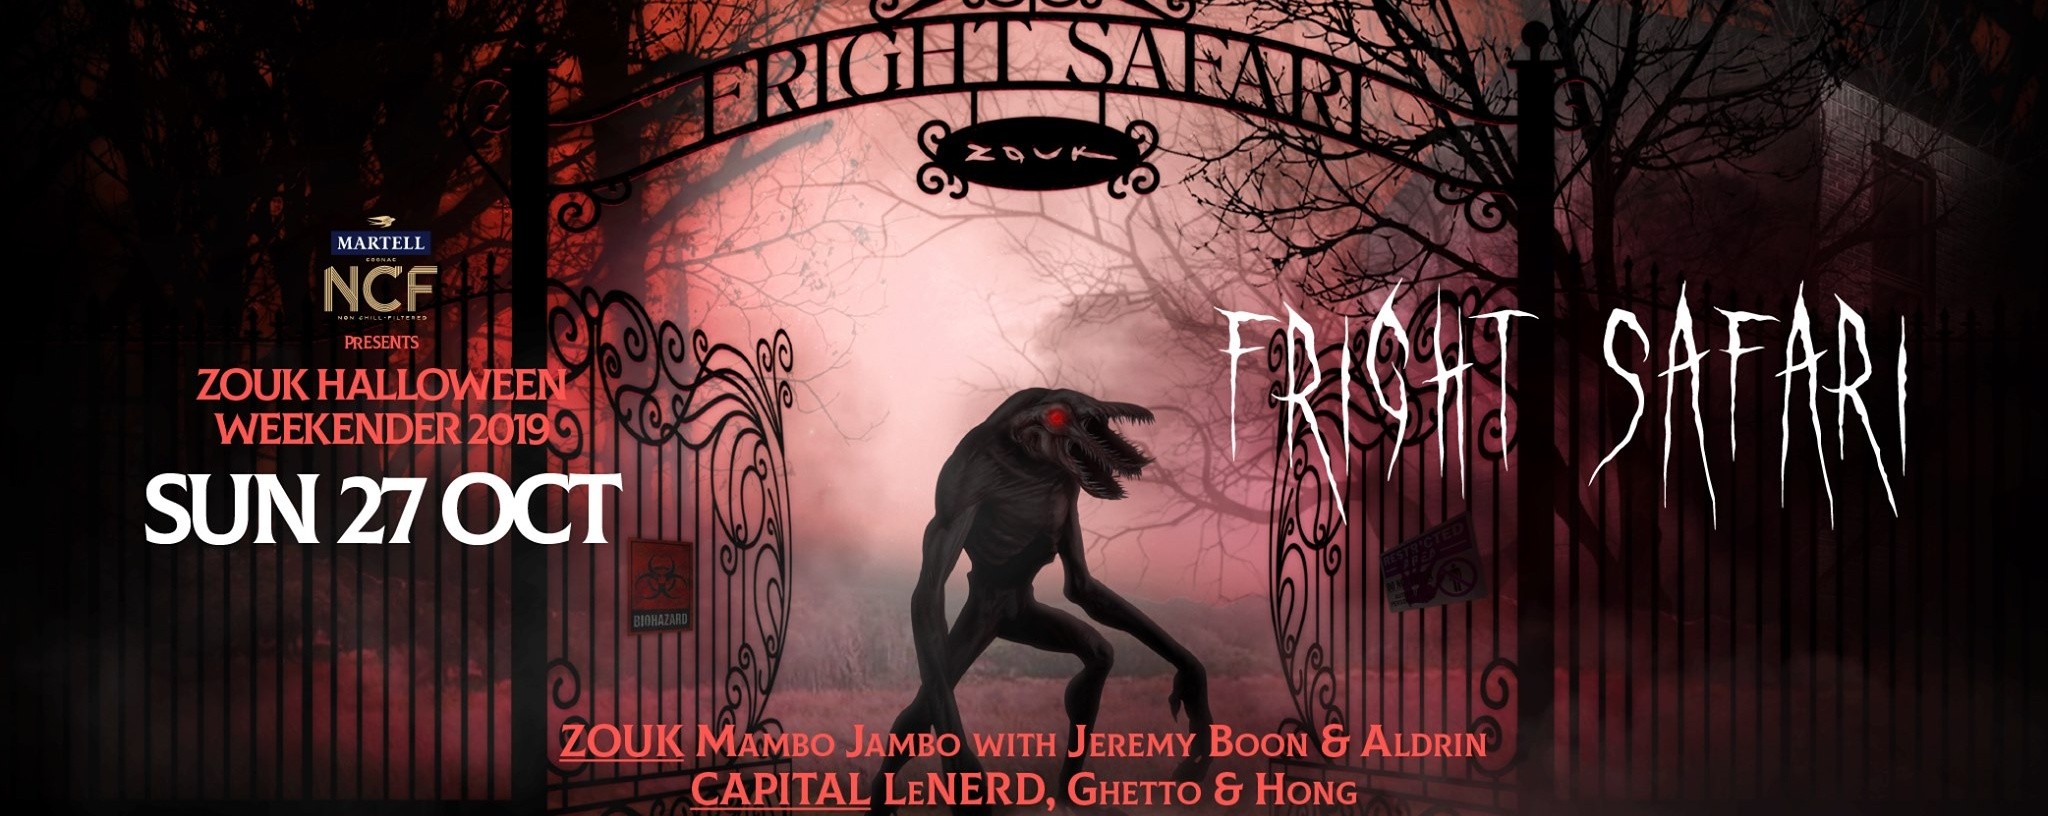 MARTELL NCF PRESENTS FRIGHT SAFARI FT. MAMBO JAMBO WITH JEREMY BOON & ALDRIN